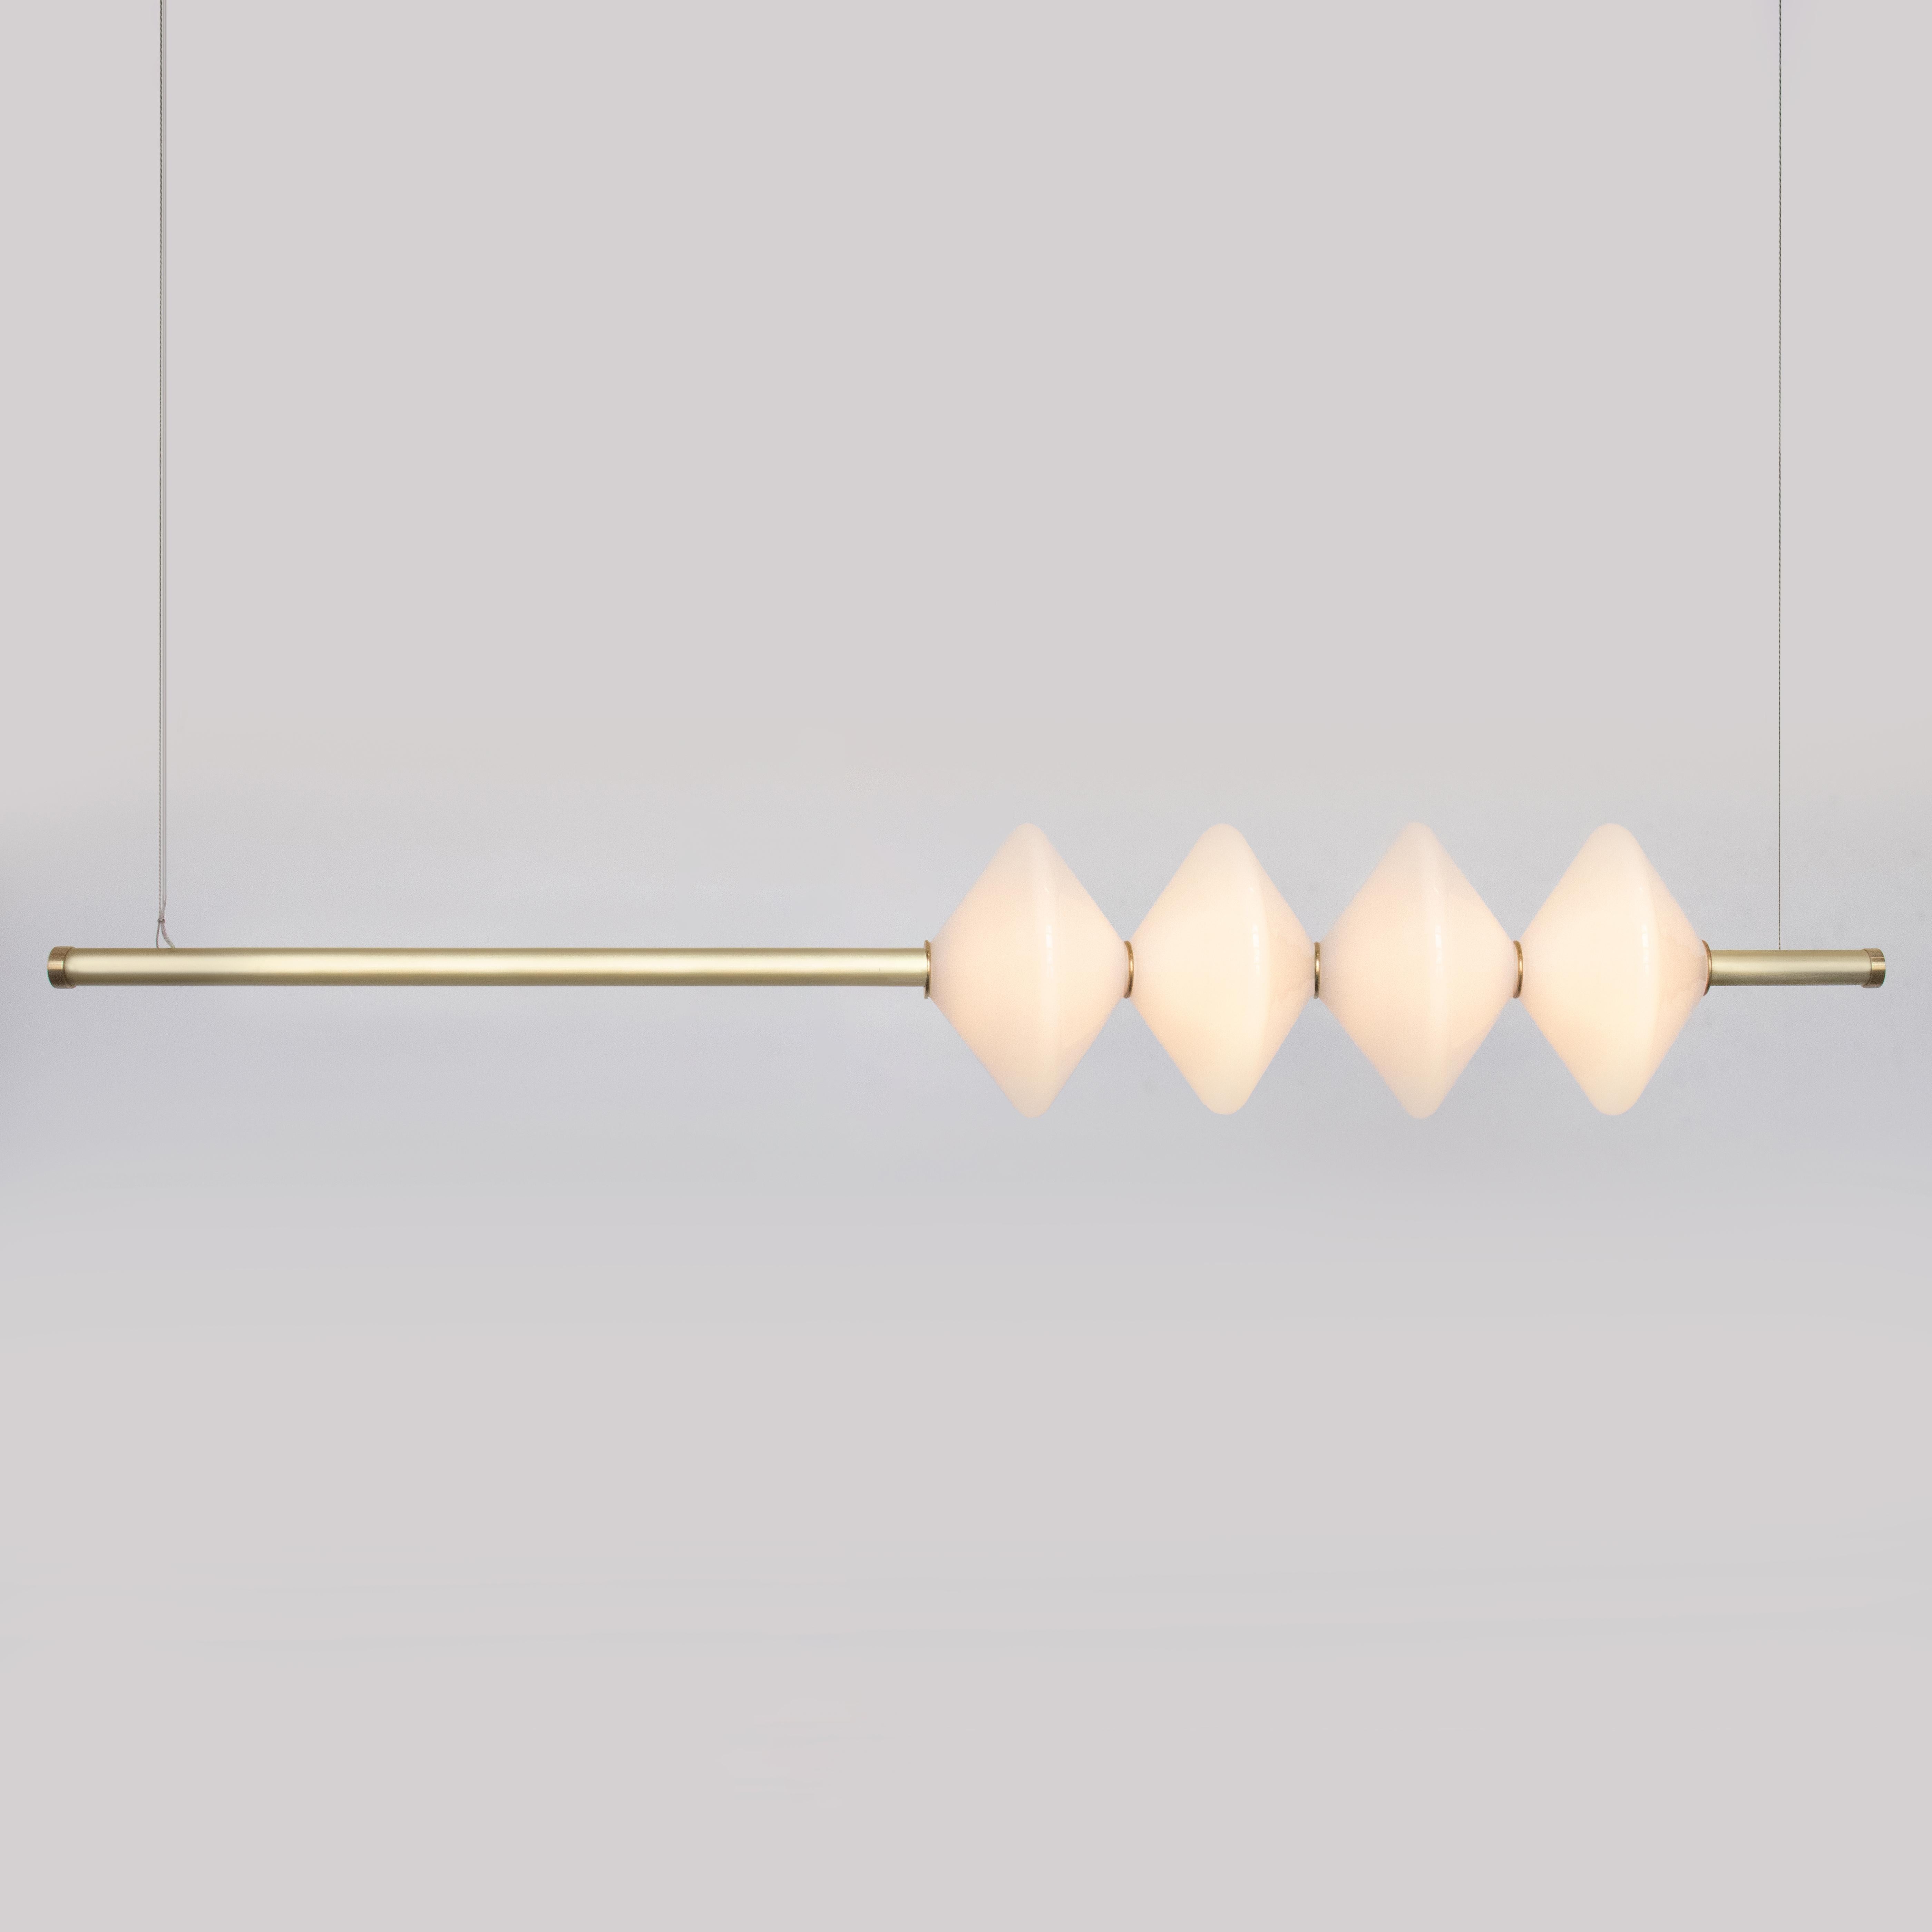 GEM4 PENDANT - LINEAR

The GEM4 Pendant is built of brass with an LED light source that is diffused by a hand-blown glass diffusers. This pendant works as an individual fixture or can be installed in larger groupings to create a dynamic